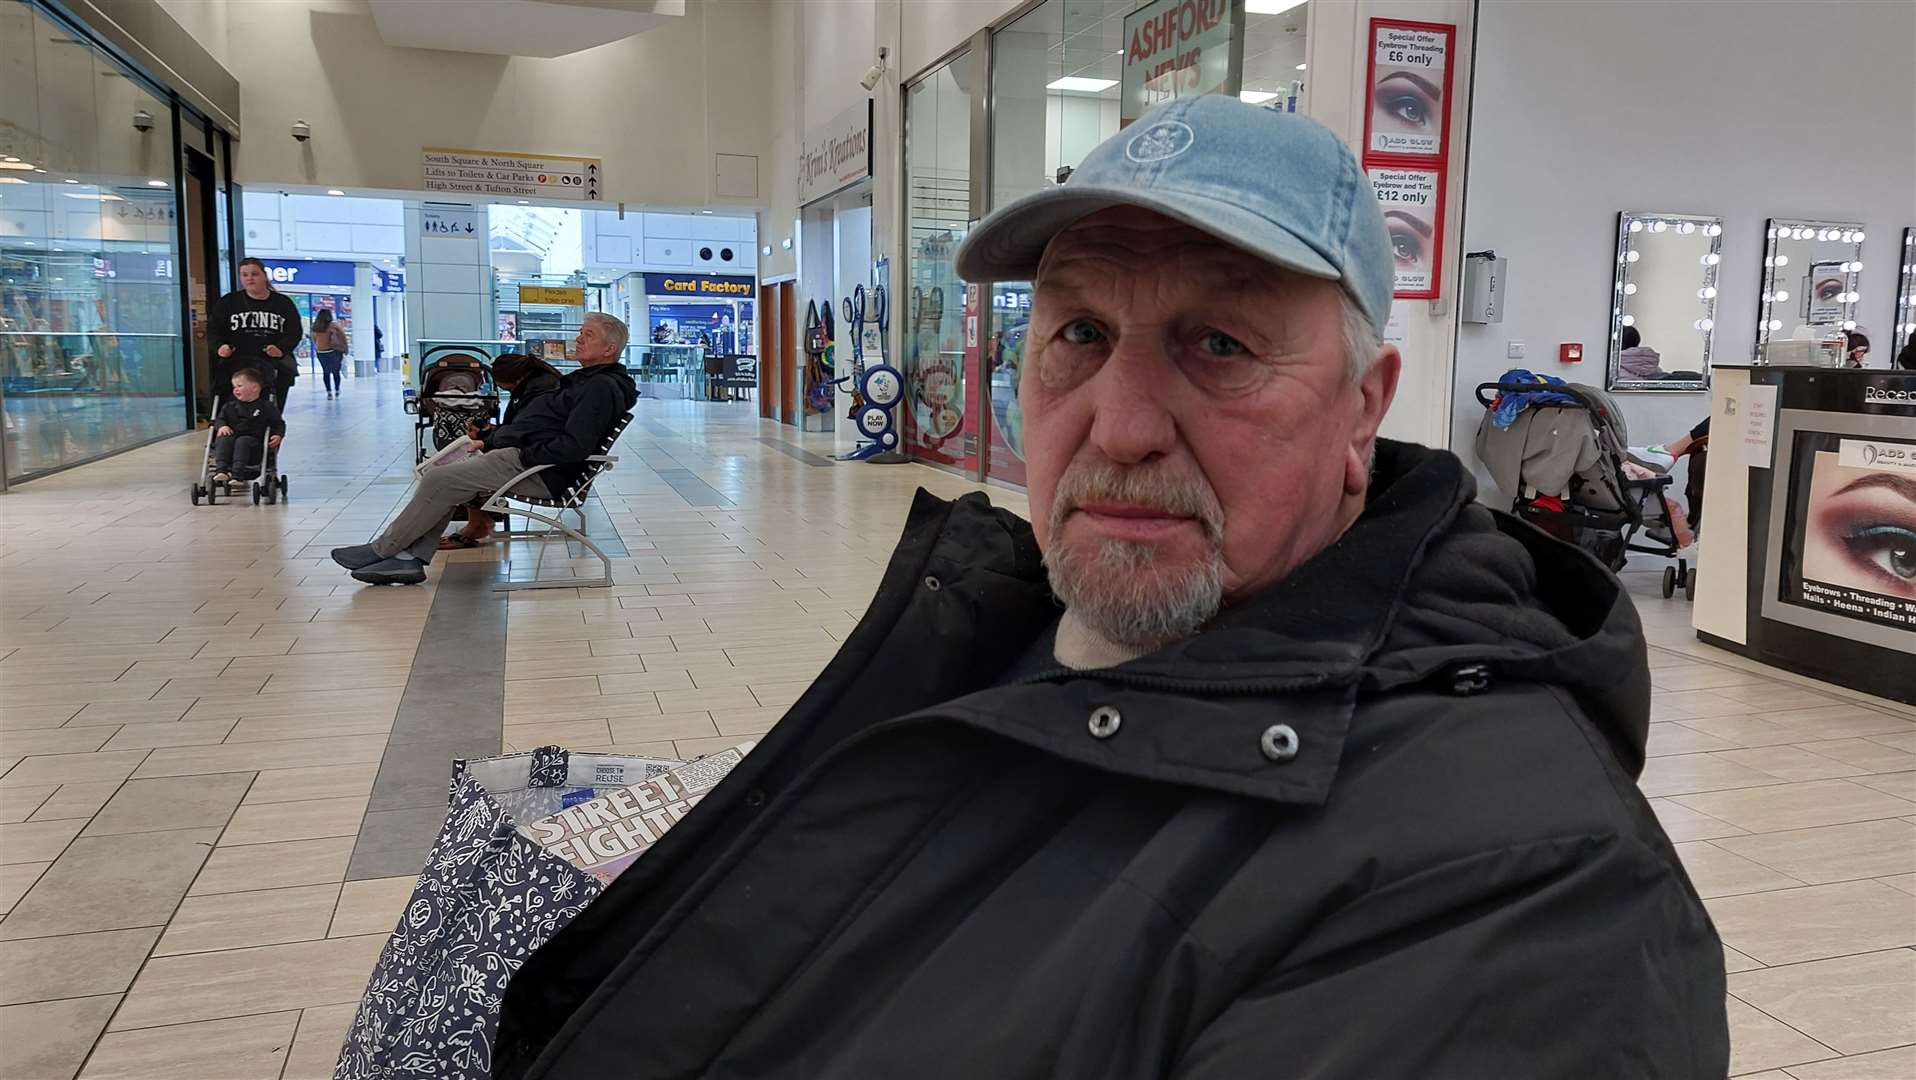 Shopper Edward Stickels feels more needs to be done to attract businesses to Ashford